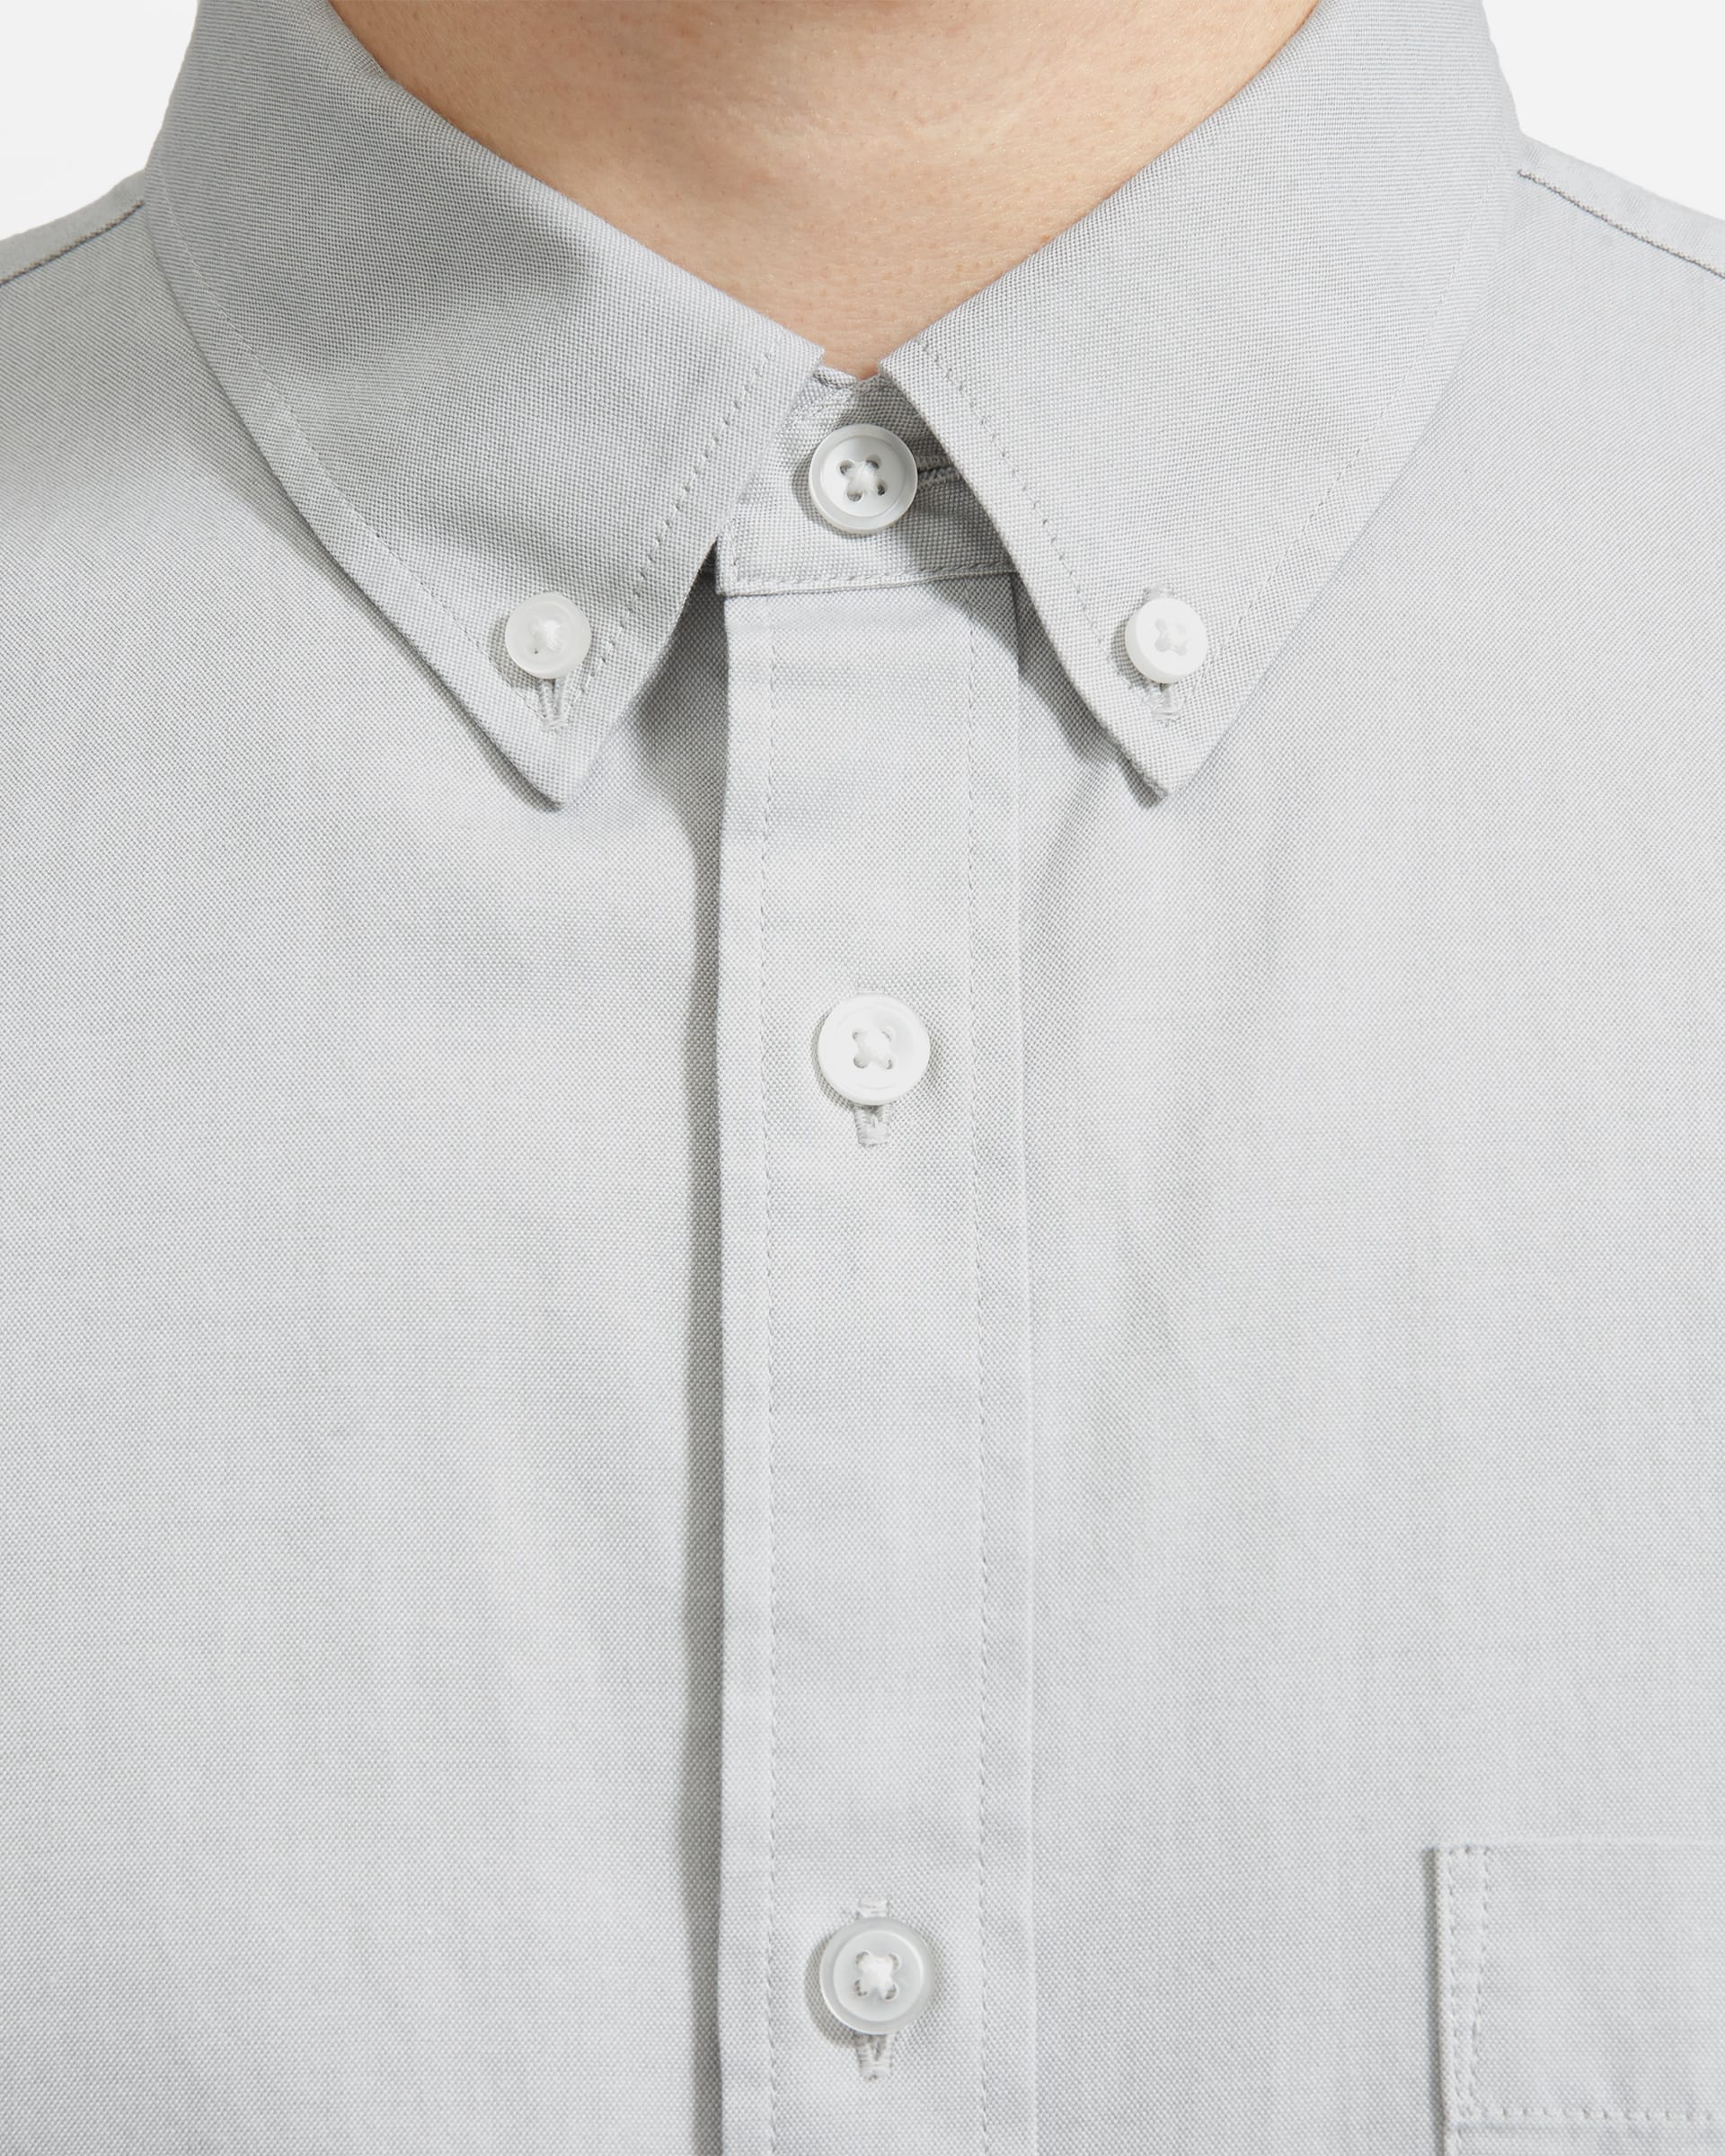 The Air Oxford Short-Sleeve Shirt Pale Charcoal – Everlane